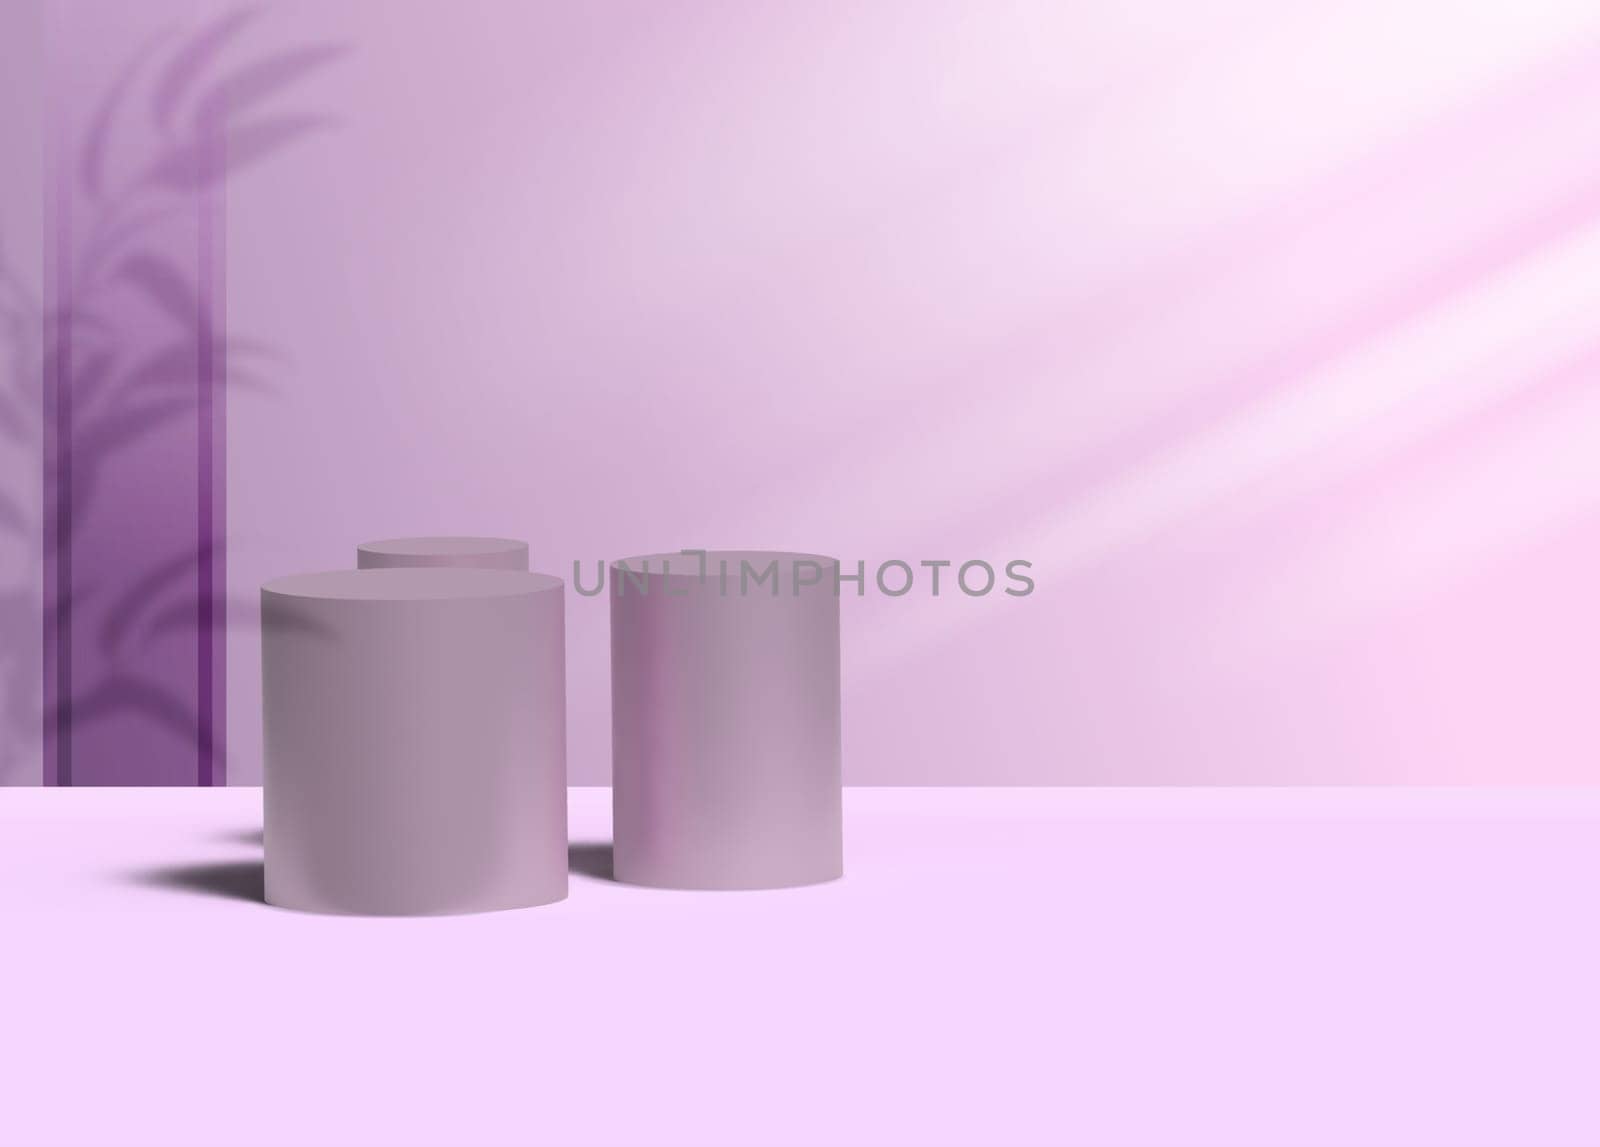 Round podiums for displaying cosmetics and products on a purple background with shadow, 3D rendering illustration